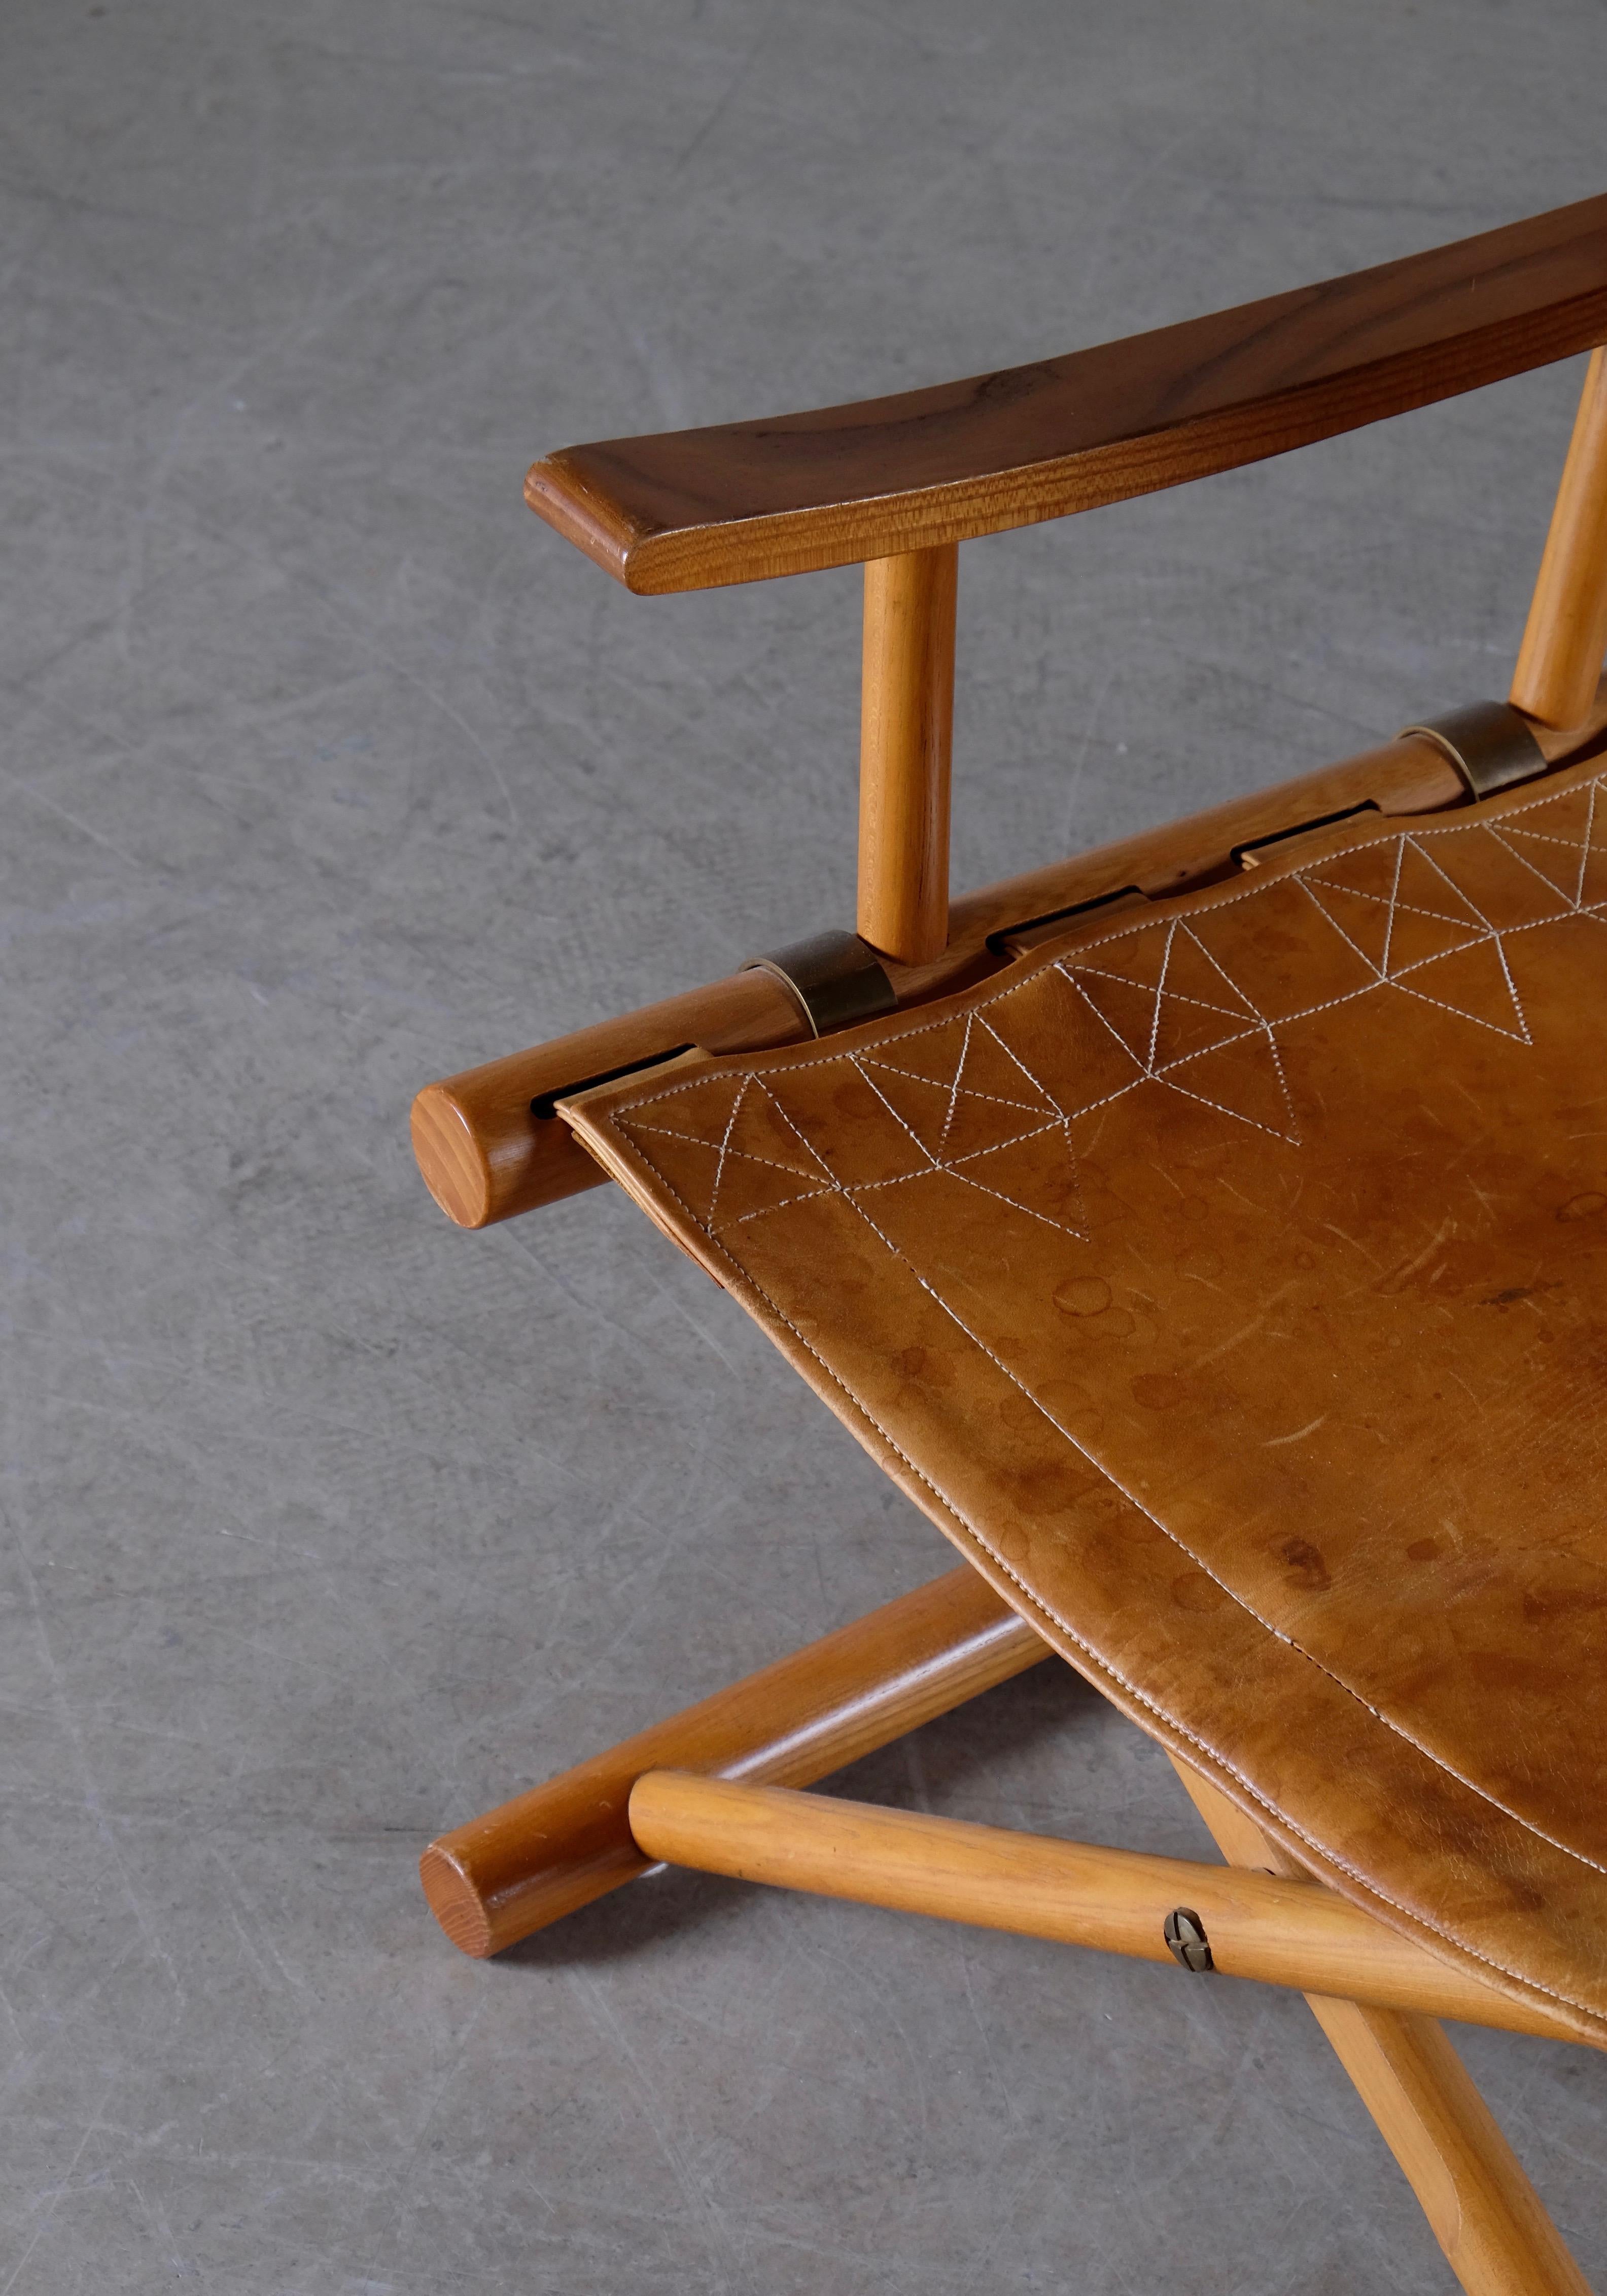 Mid-20th Century Rare Folding Chair by Sune Lindström for NK, Sweden, 1963